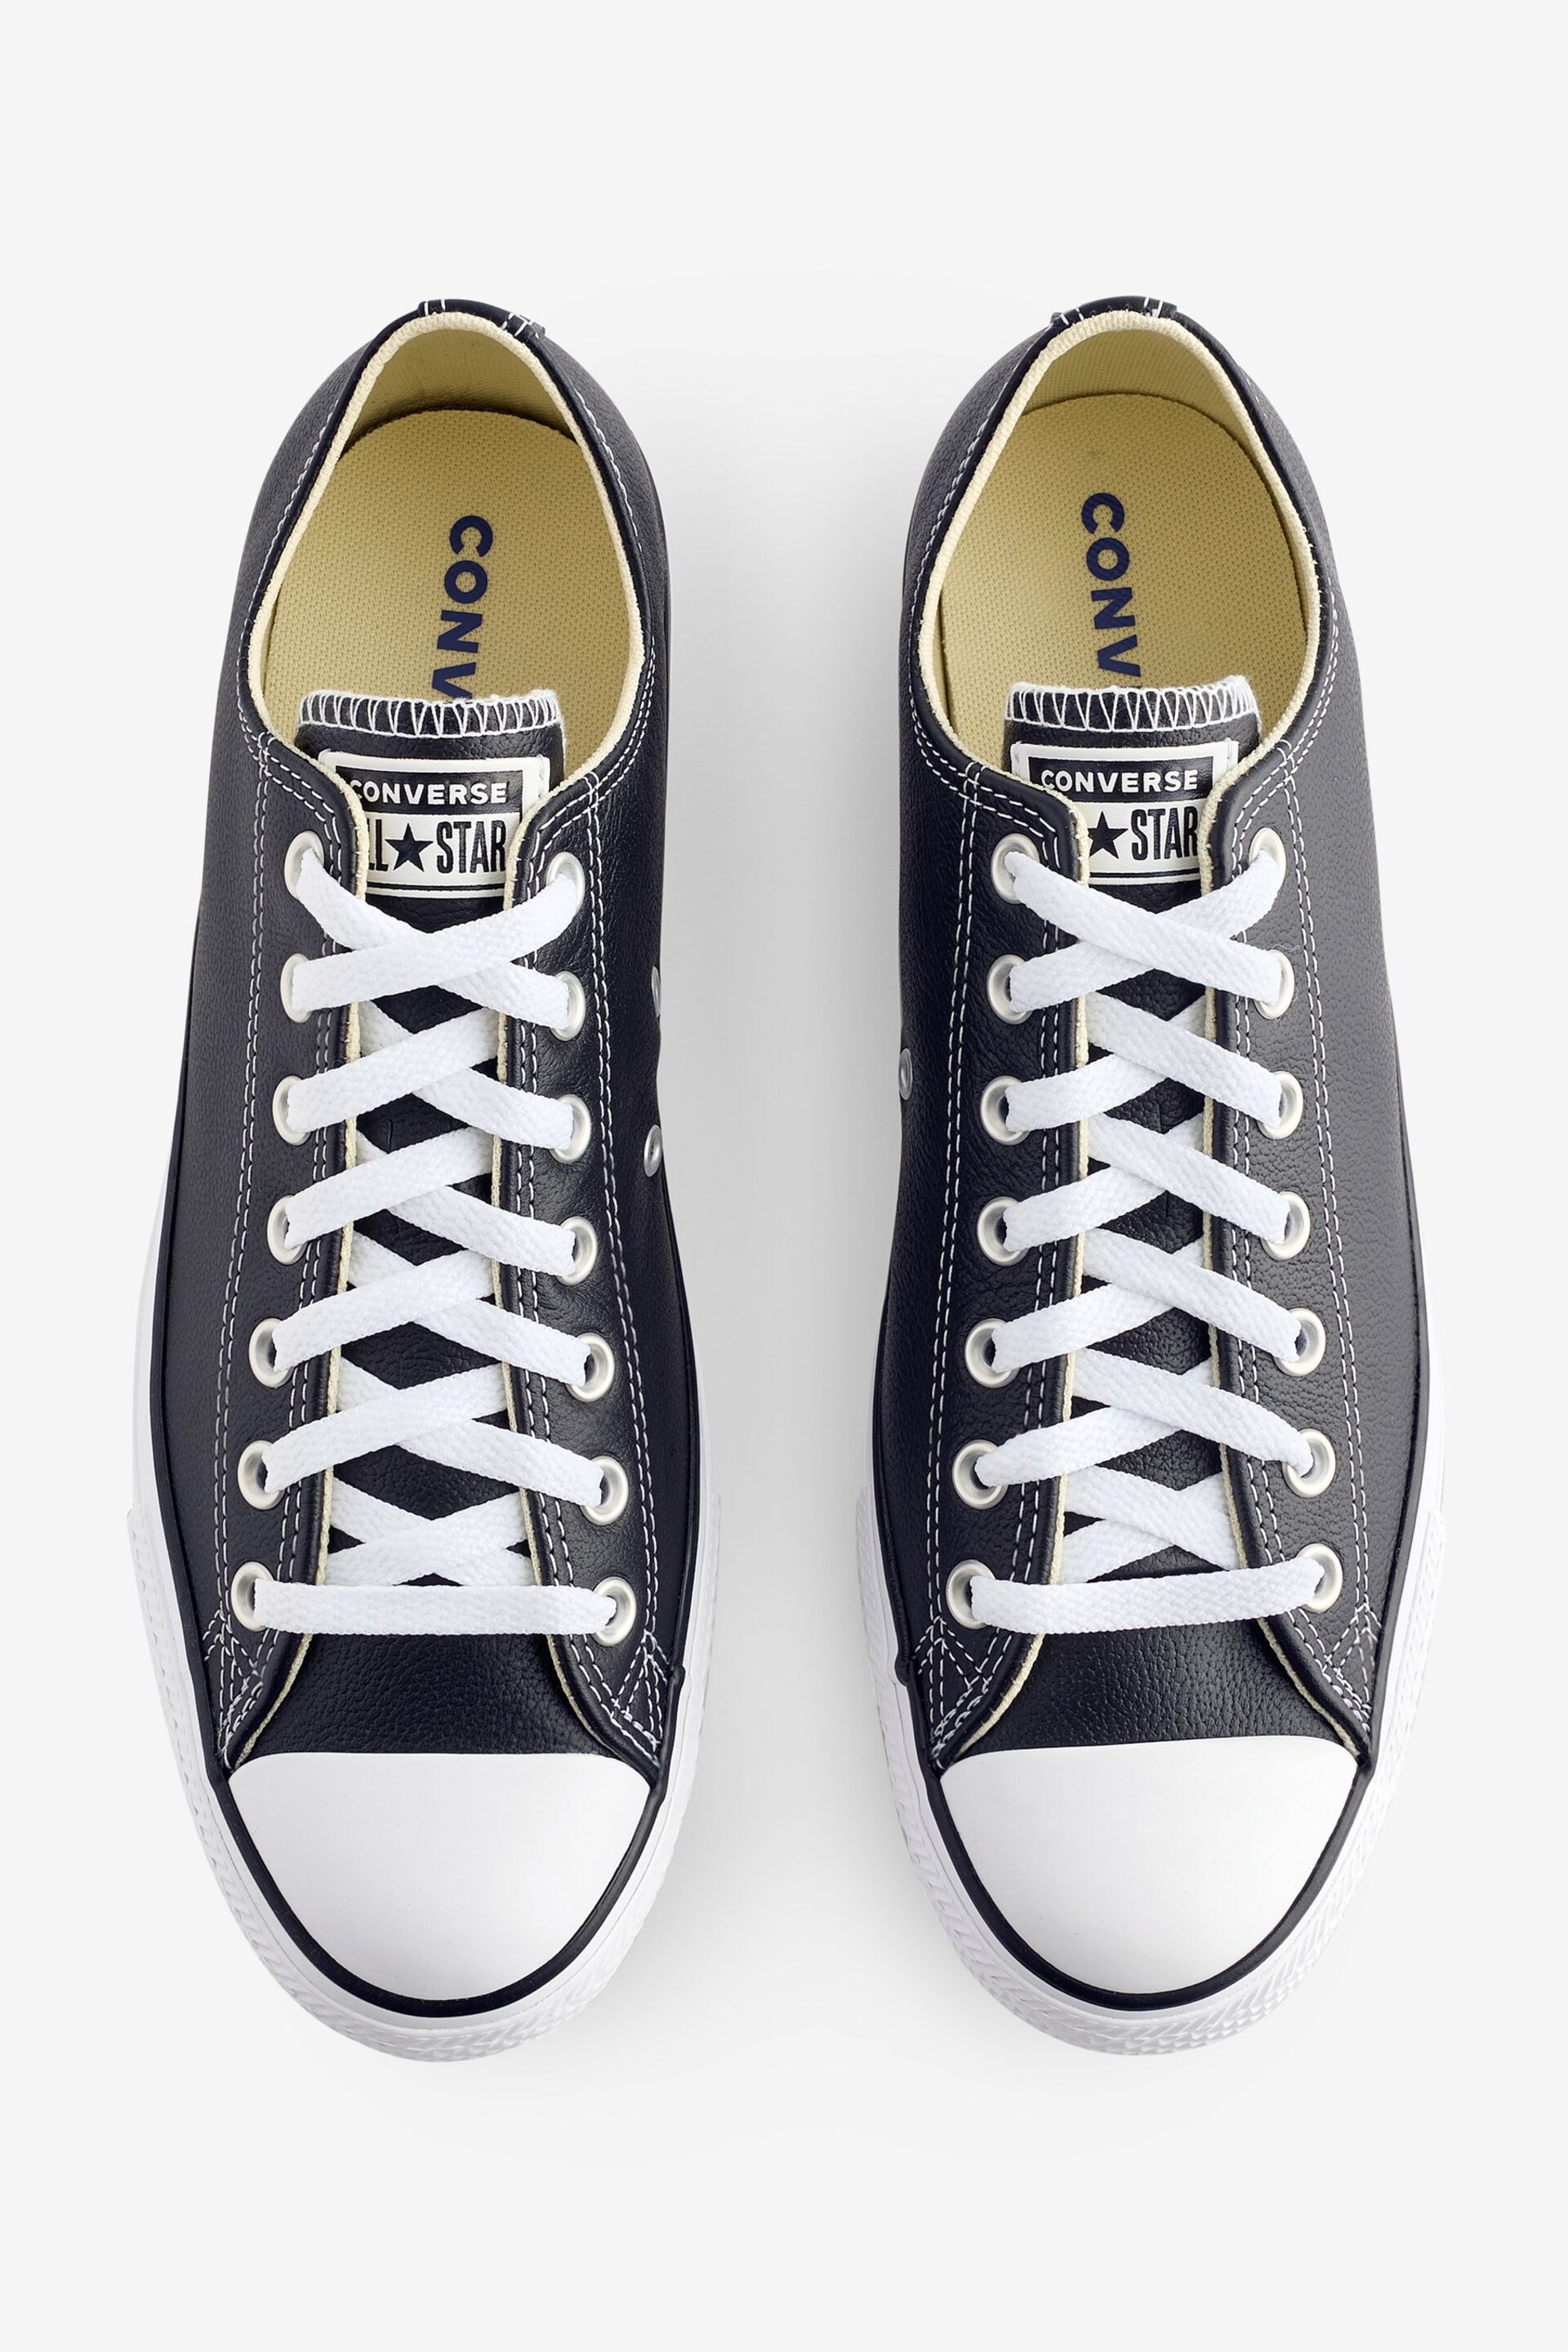 Converse Black Leather Chuck Taylor All Star Low Trainers - Image 7 of 11